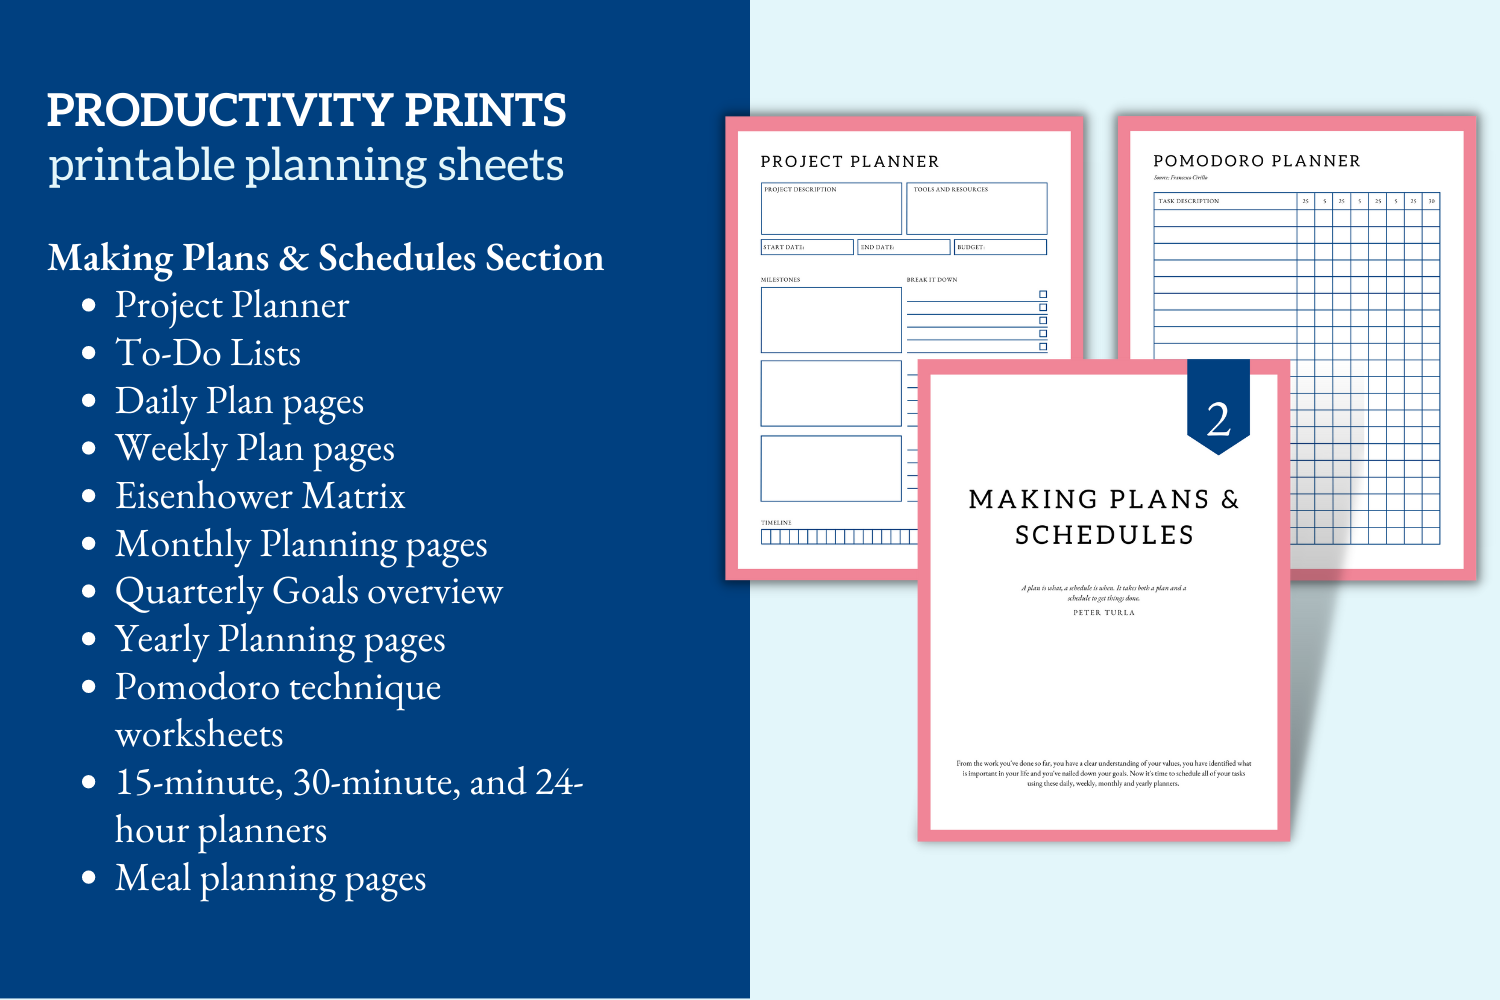 Making Plans and Schedules section in Productivity Prints printable planning sheets.